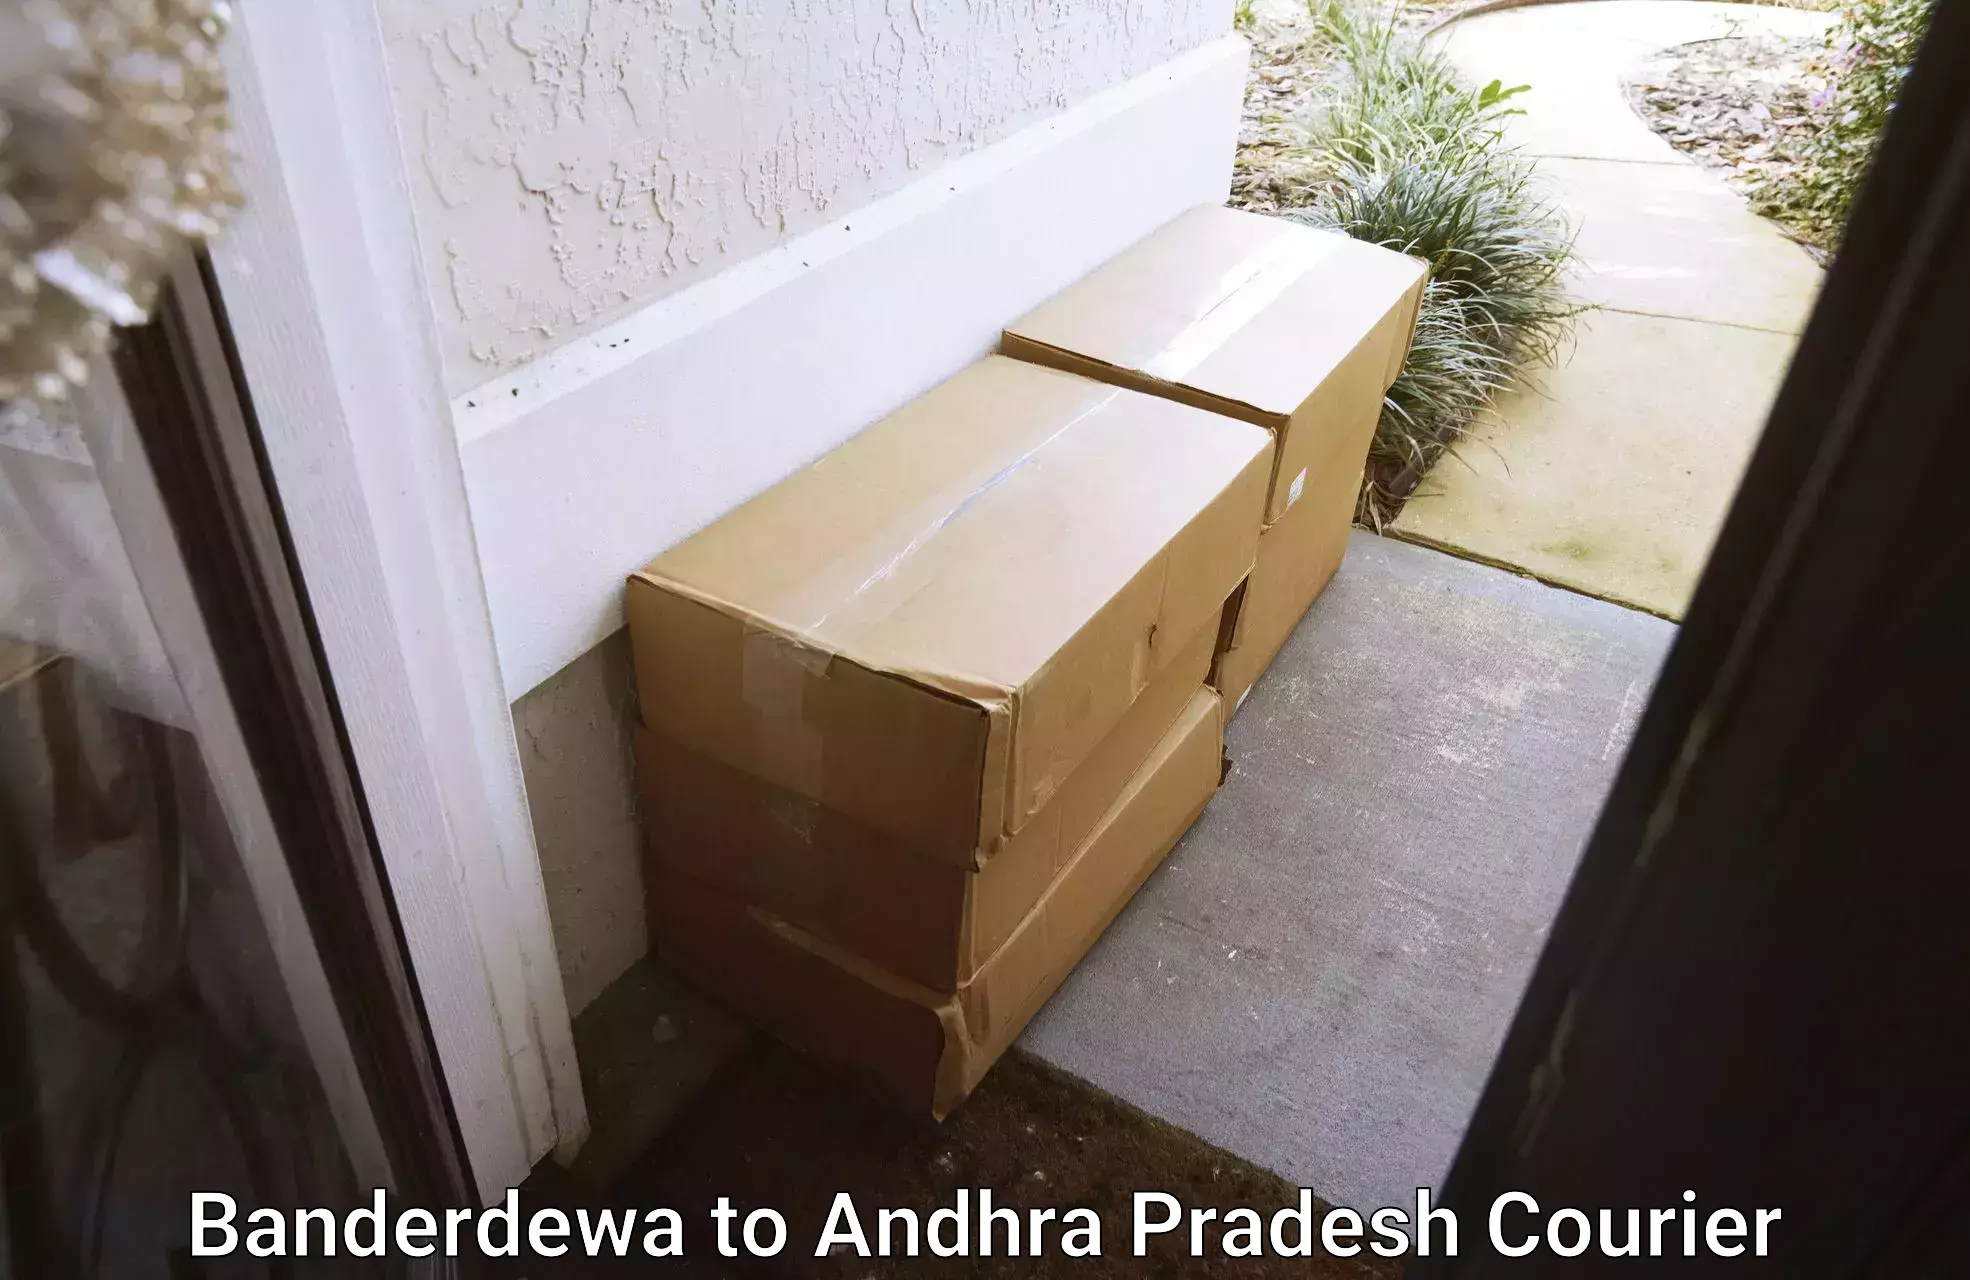 Customer-oriented courier services in Banderdewa to Andhra Pradesh